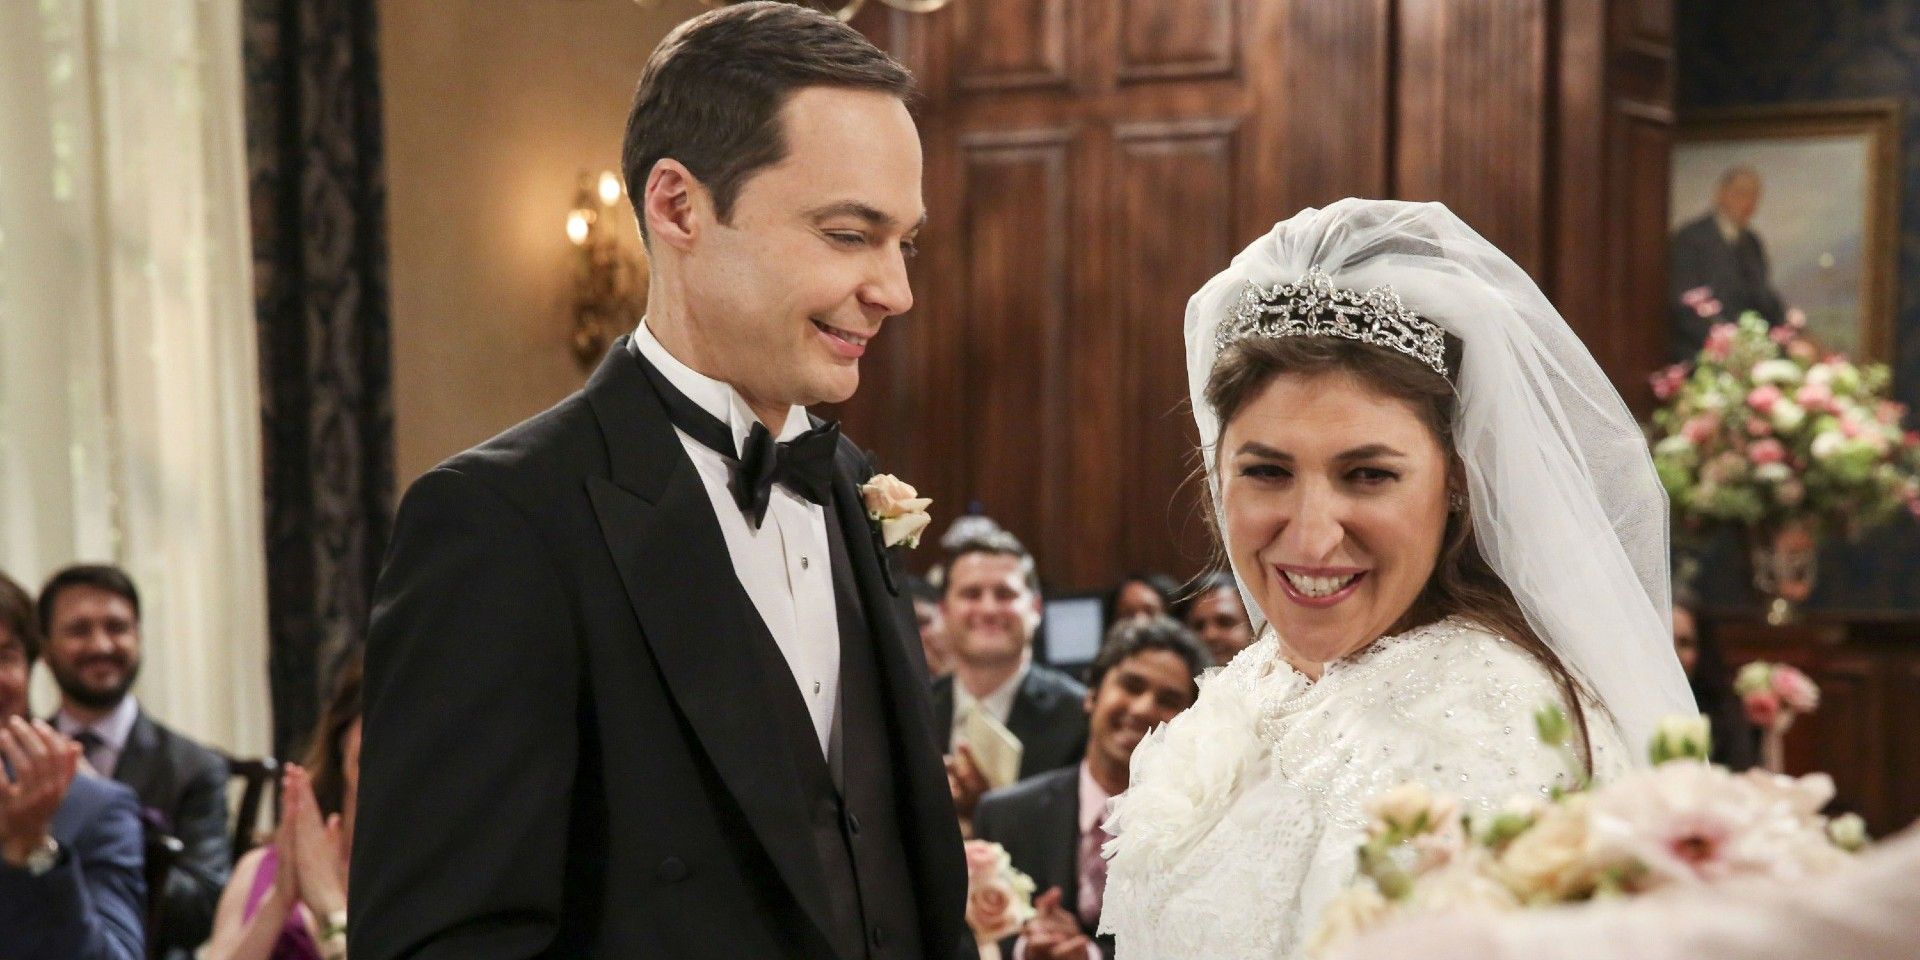 Sheldon and Amy's wedding in The Big Bang Theory